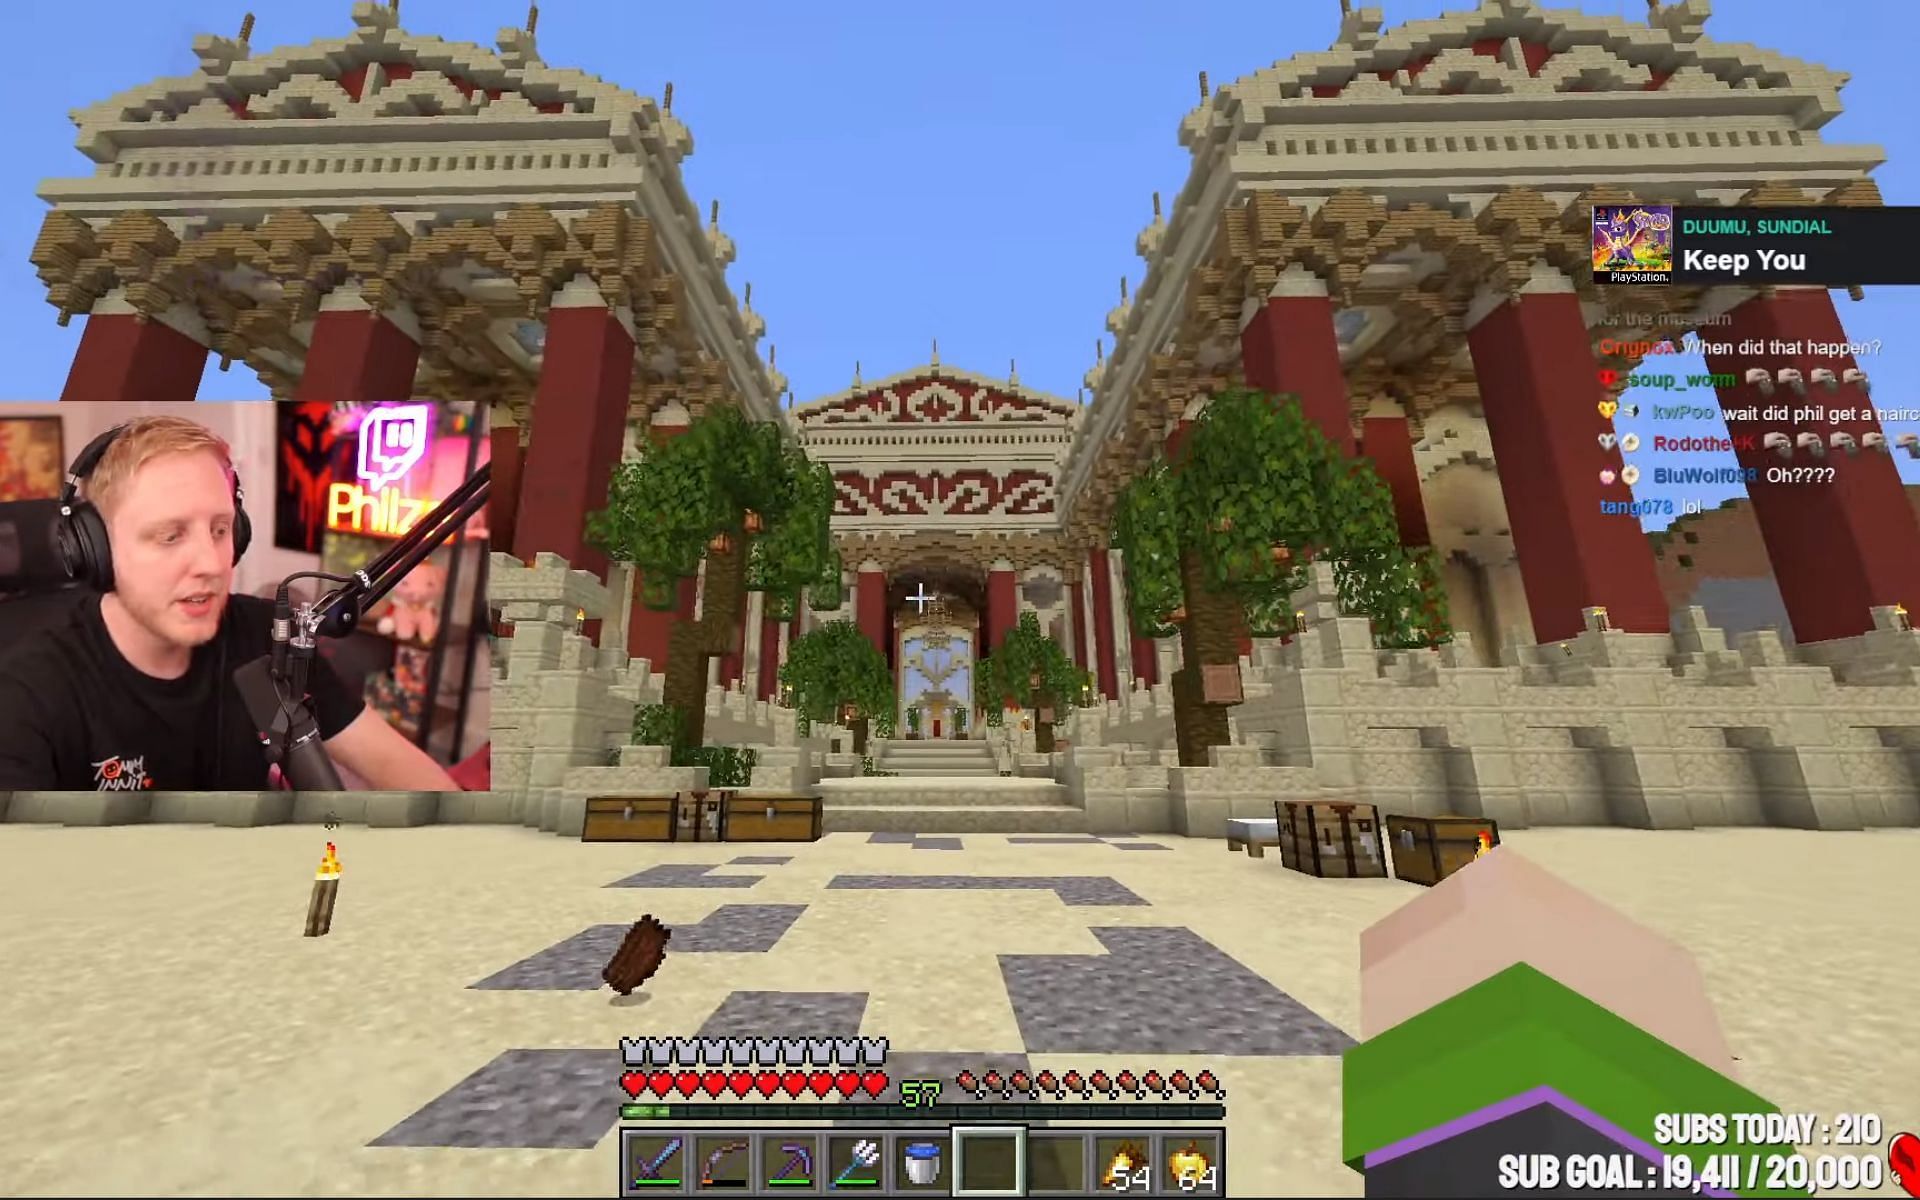 Technoblade TOURS Ranboo's NEW HOUSE on the Dream SMP 